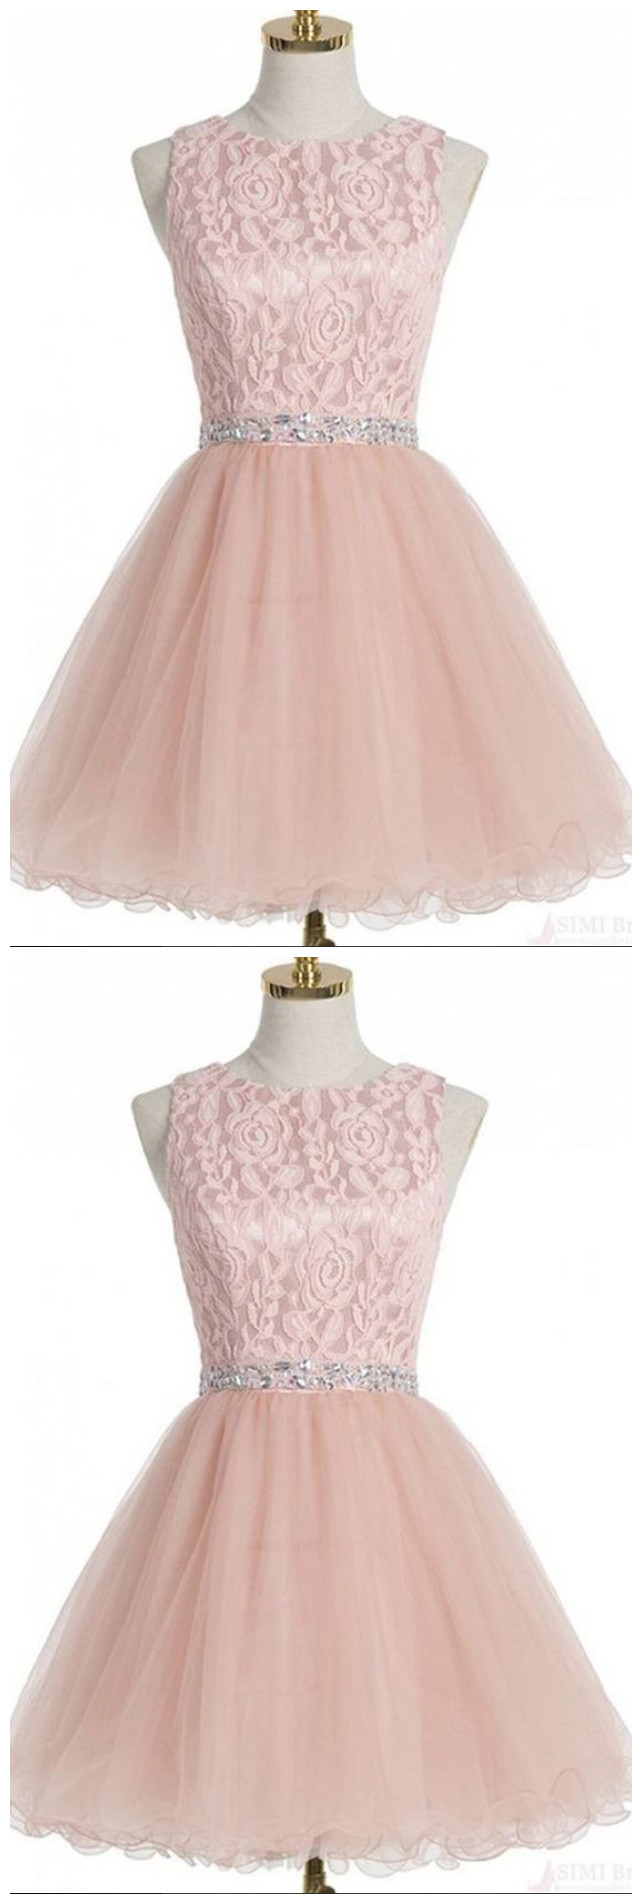 Cute Pink Organza Round Neck Lace A-line Short Dresses